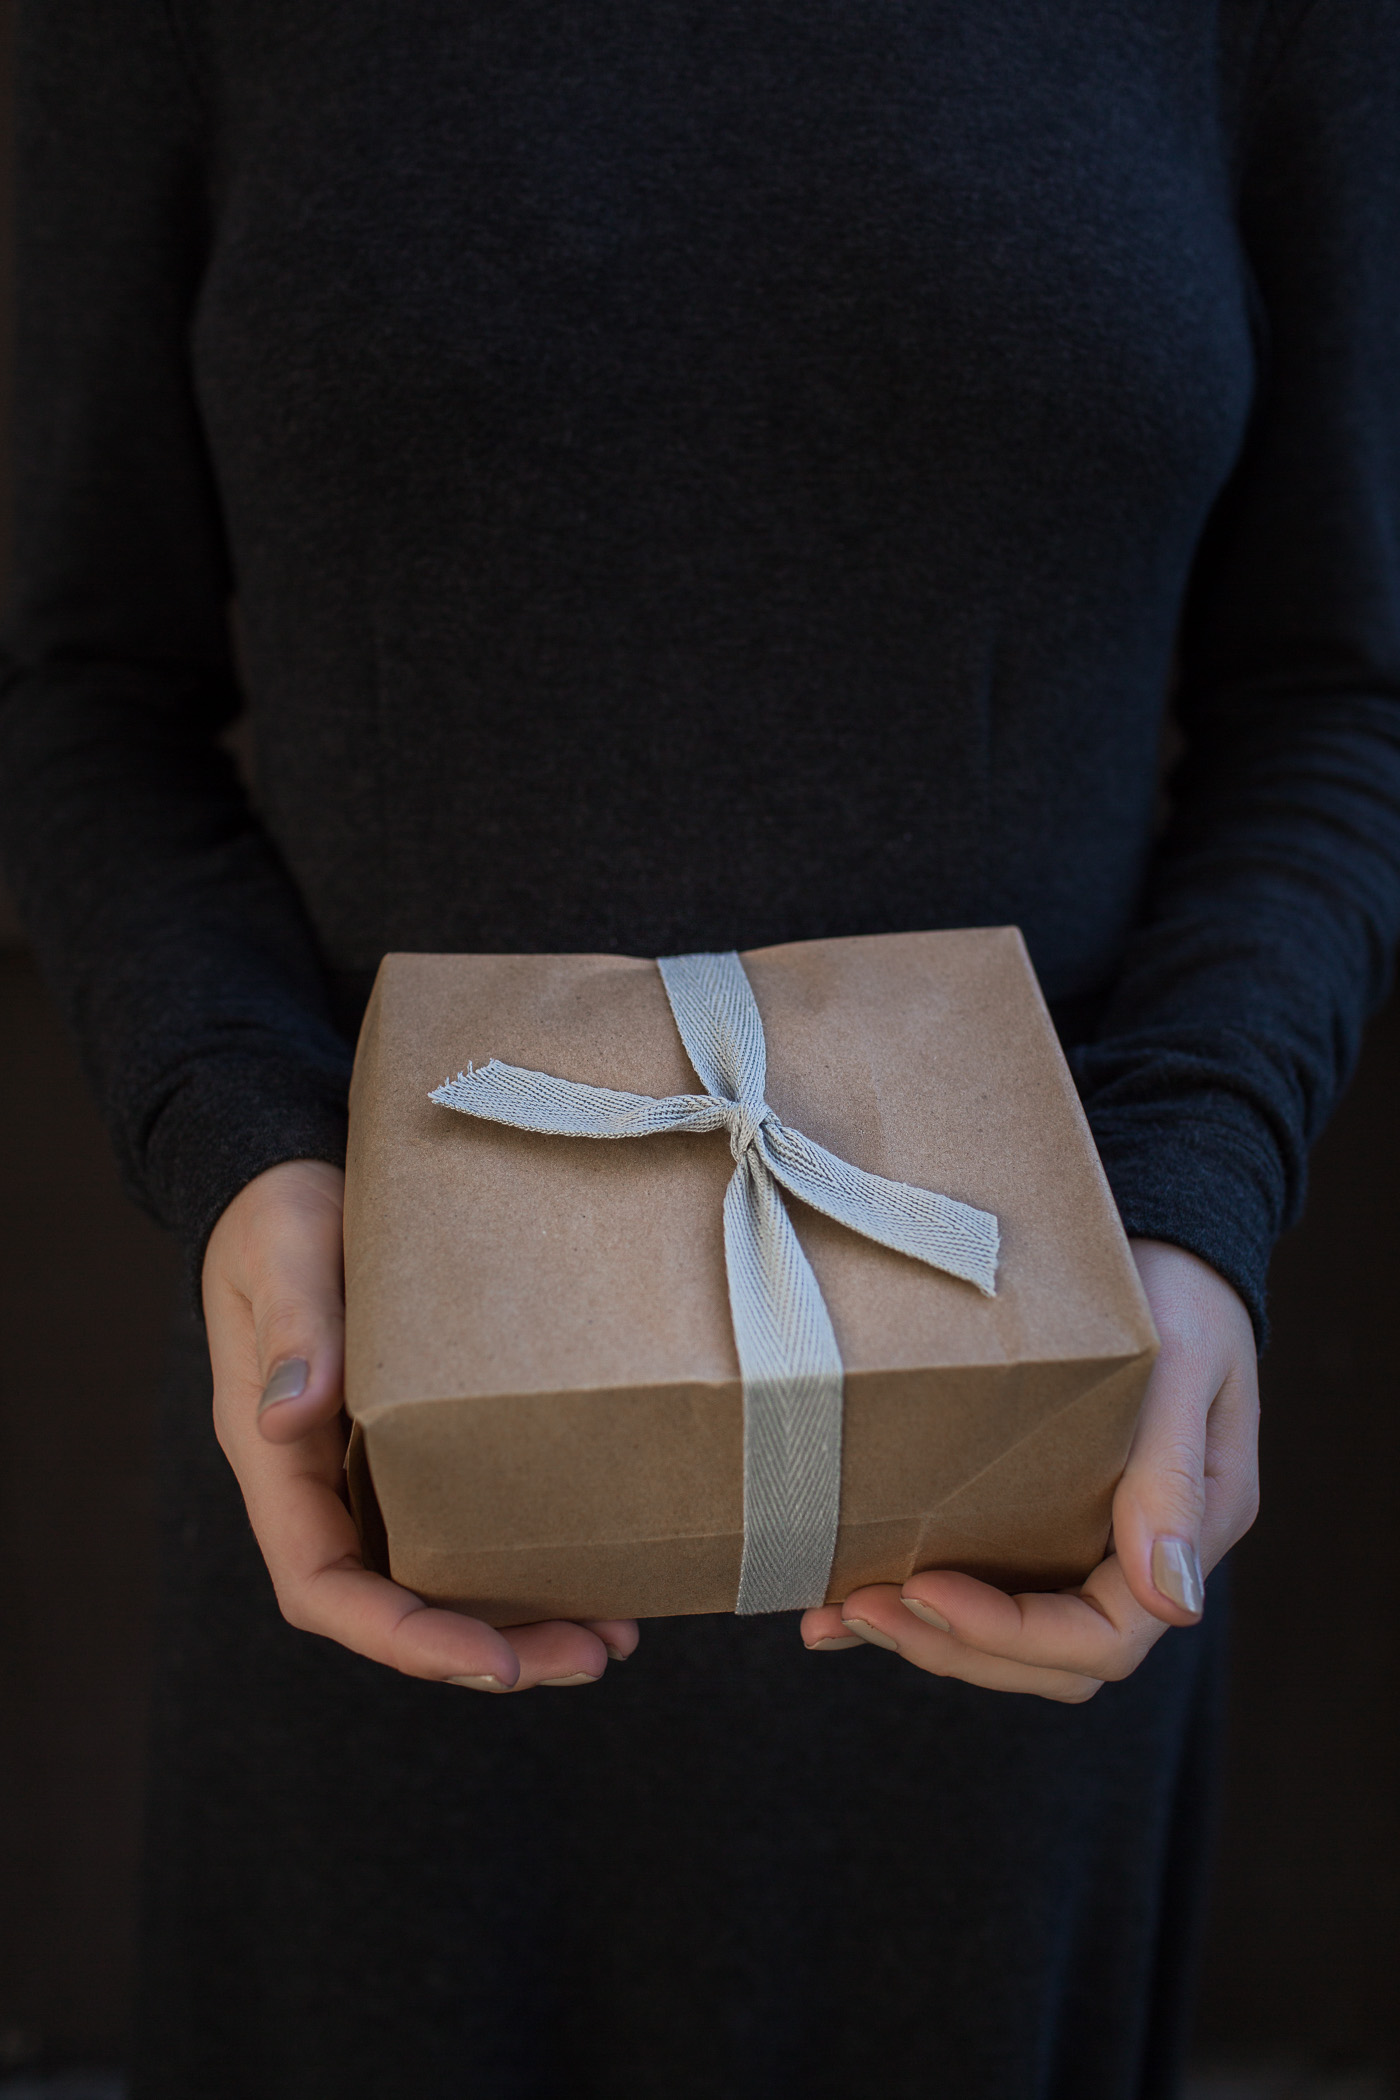 How to Give a Meaningful Gift